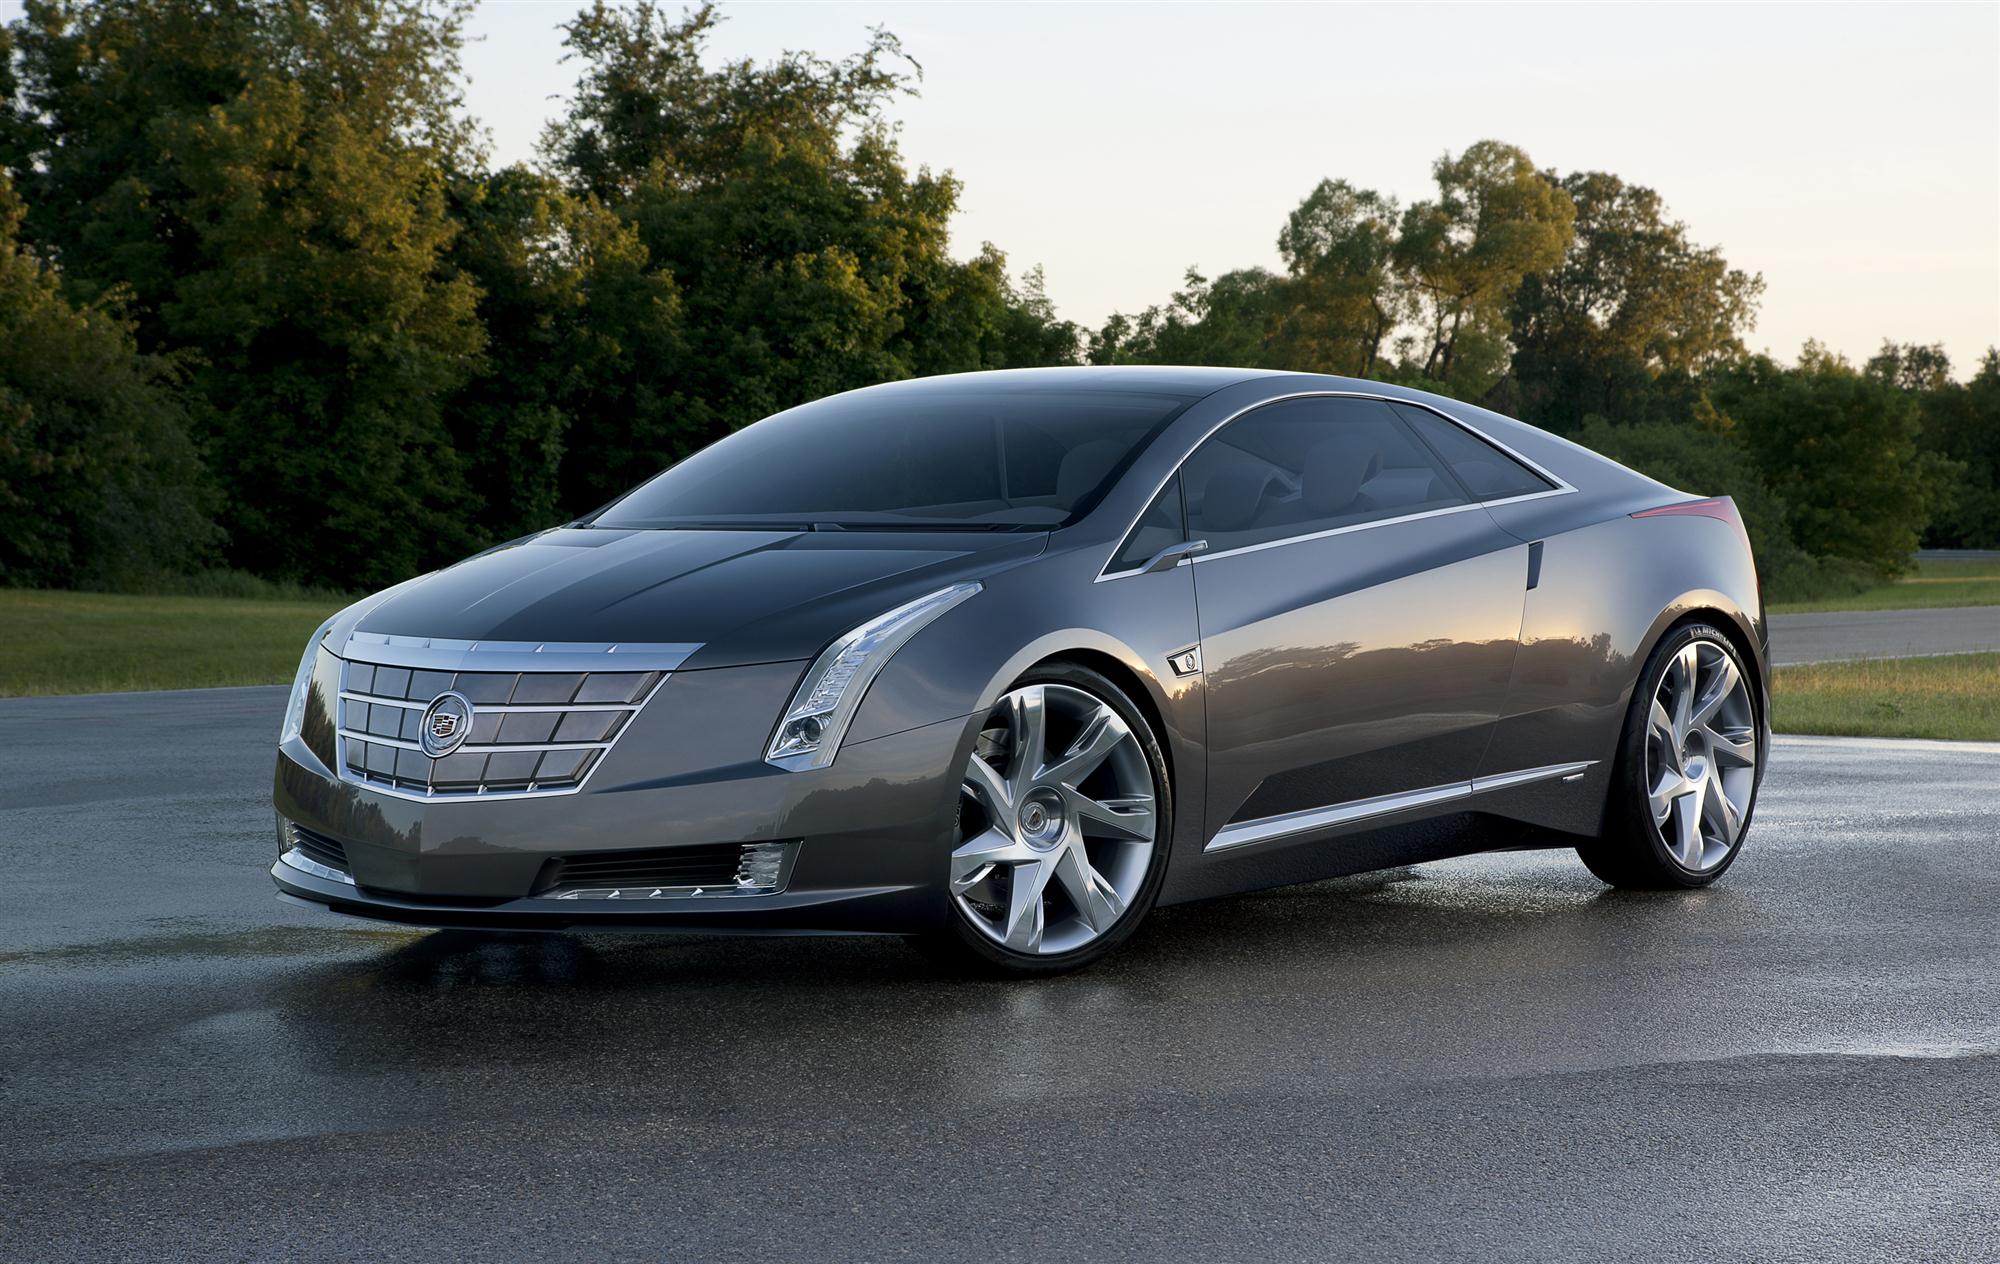 New Details On Cadillac ELR Extended-Range Electric Car